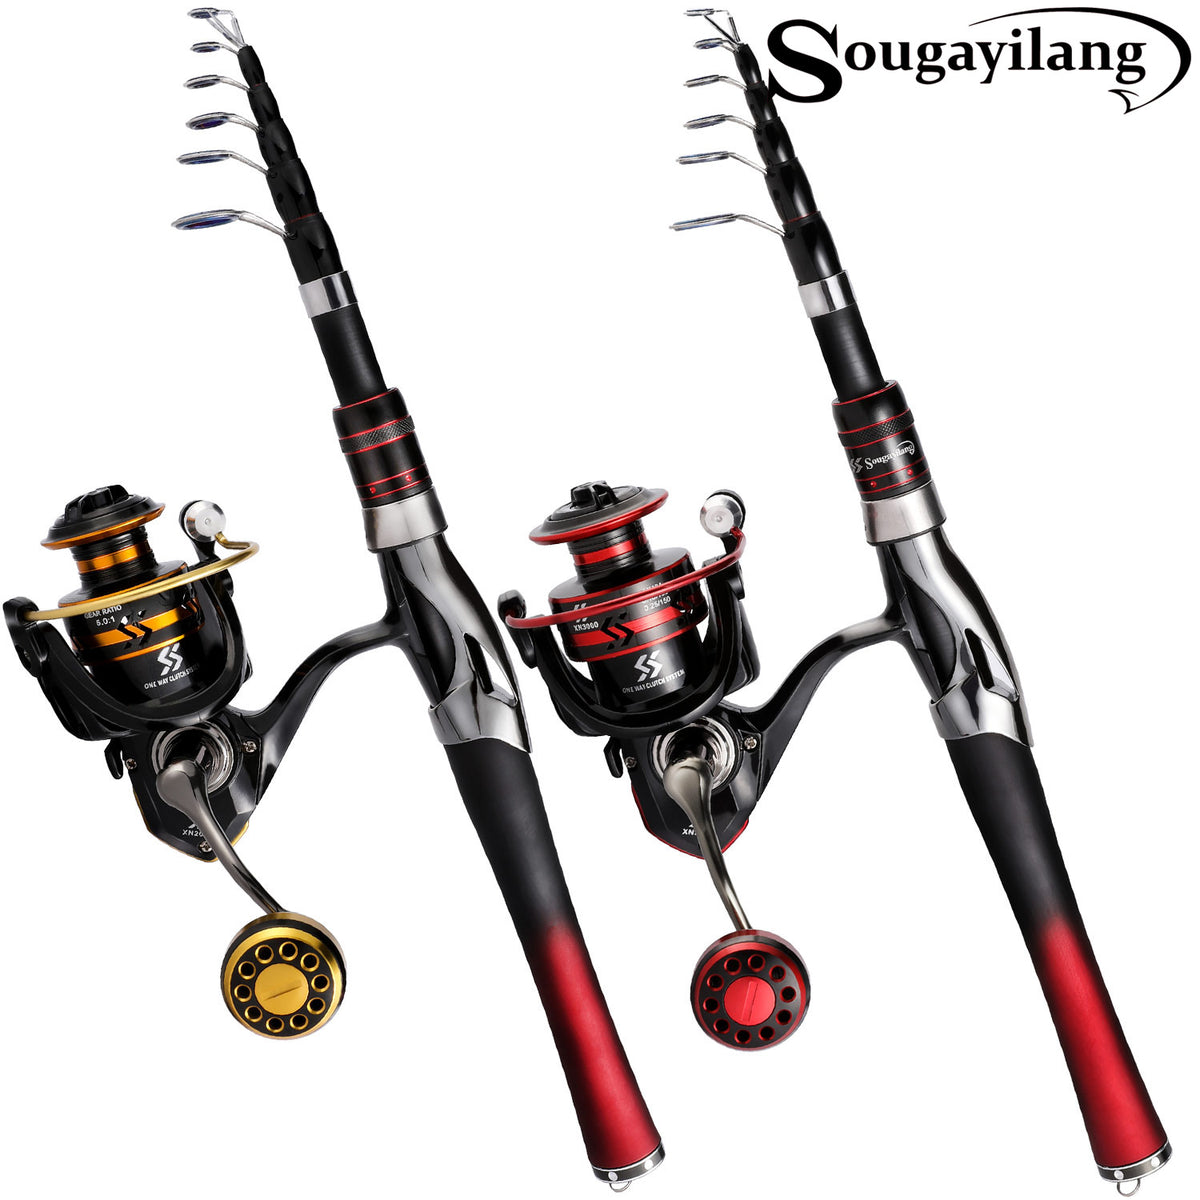 Sougayilang 1.6M Telescopic Portable Spinning Fishing Rod and Fishing Reel  Set Rod Reel Combo For Outdoors Fishing Tackle